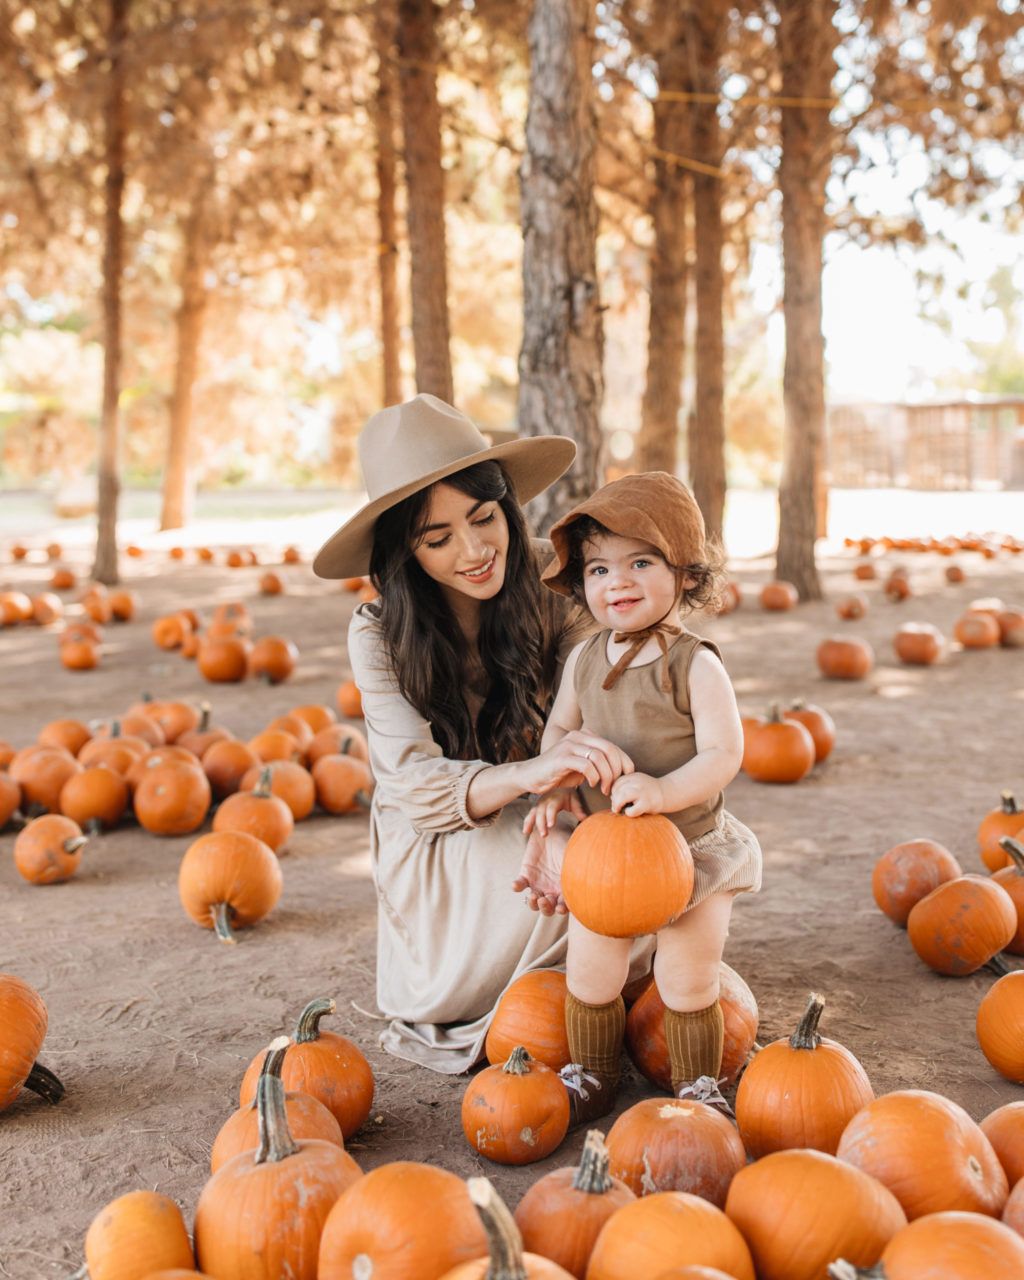 Dress To Impress For Fall Family Festivities With These Petite Outfits